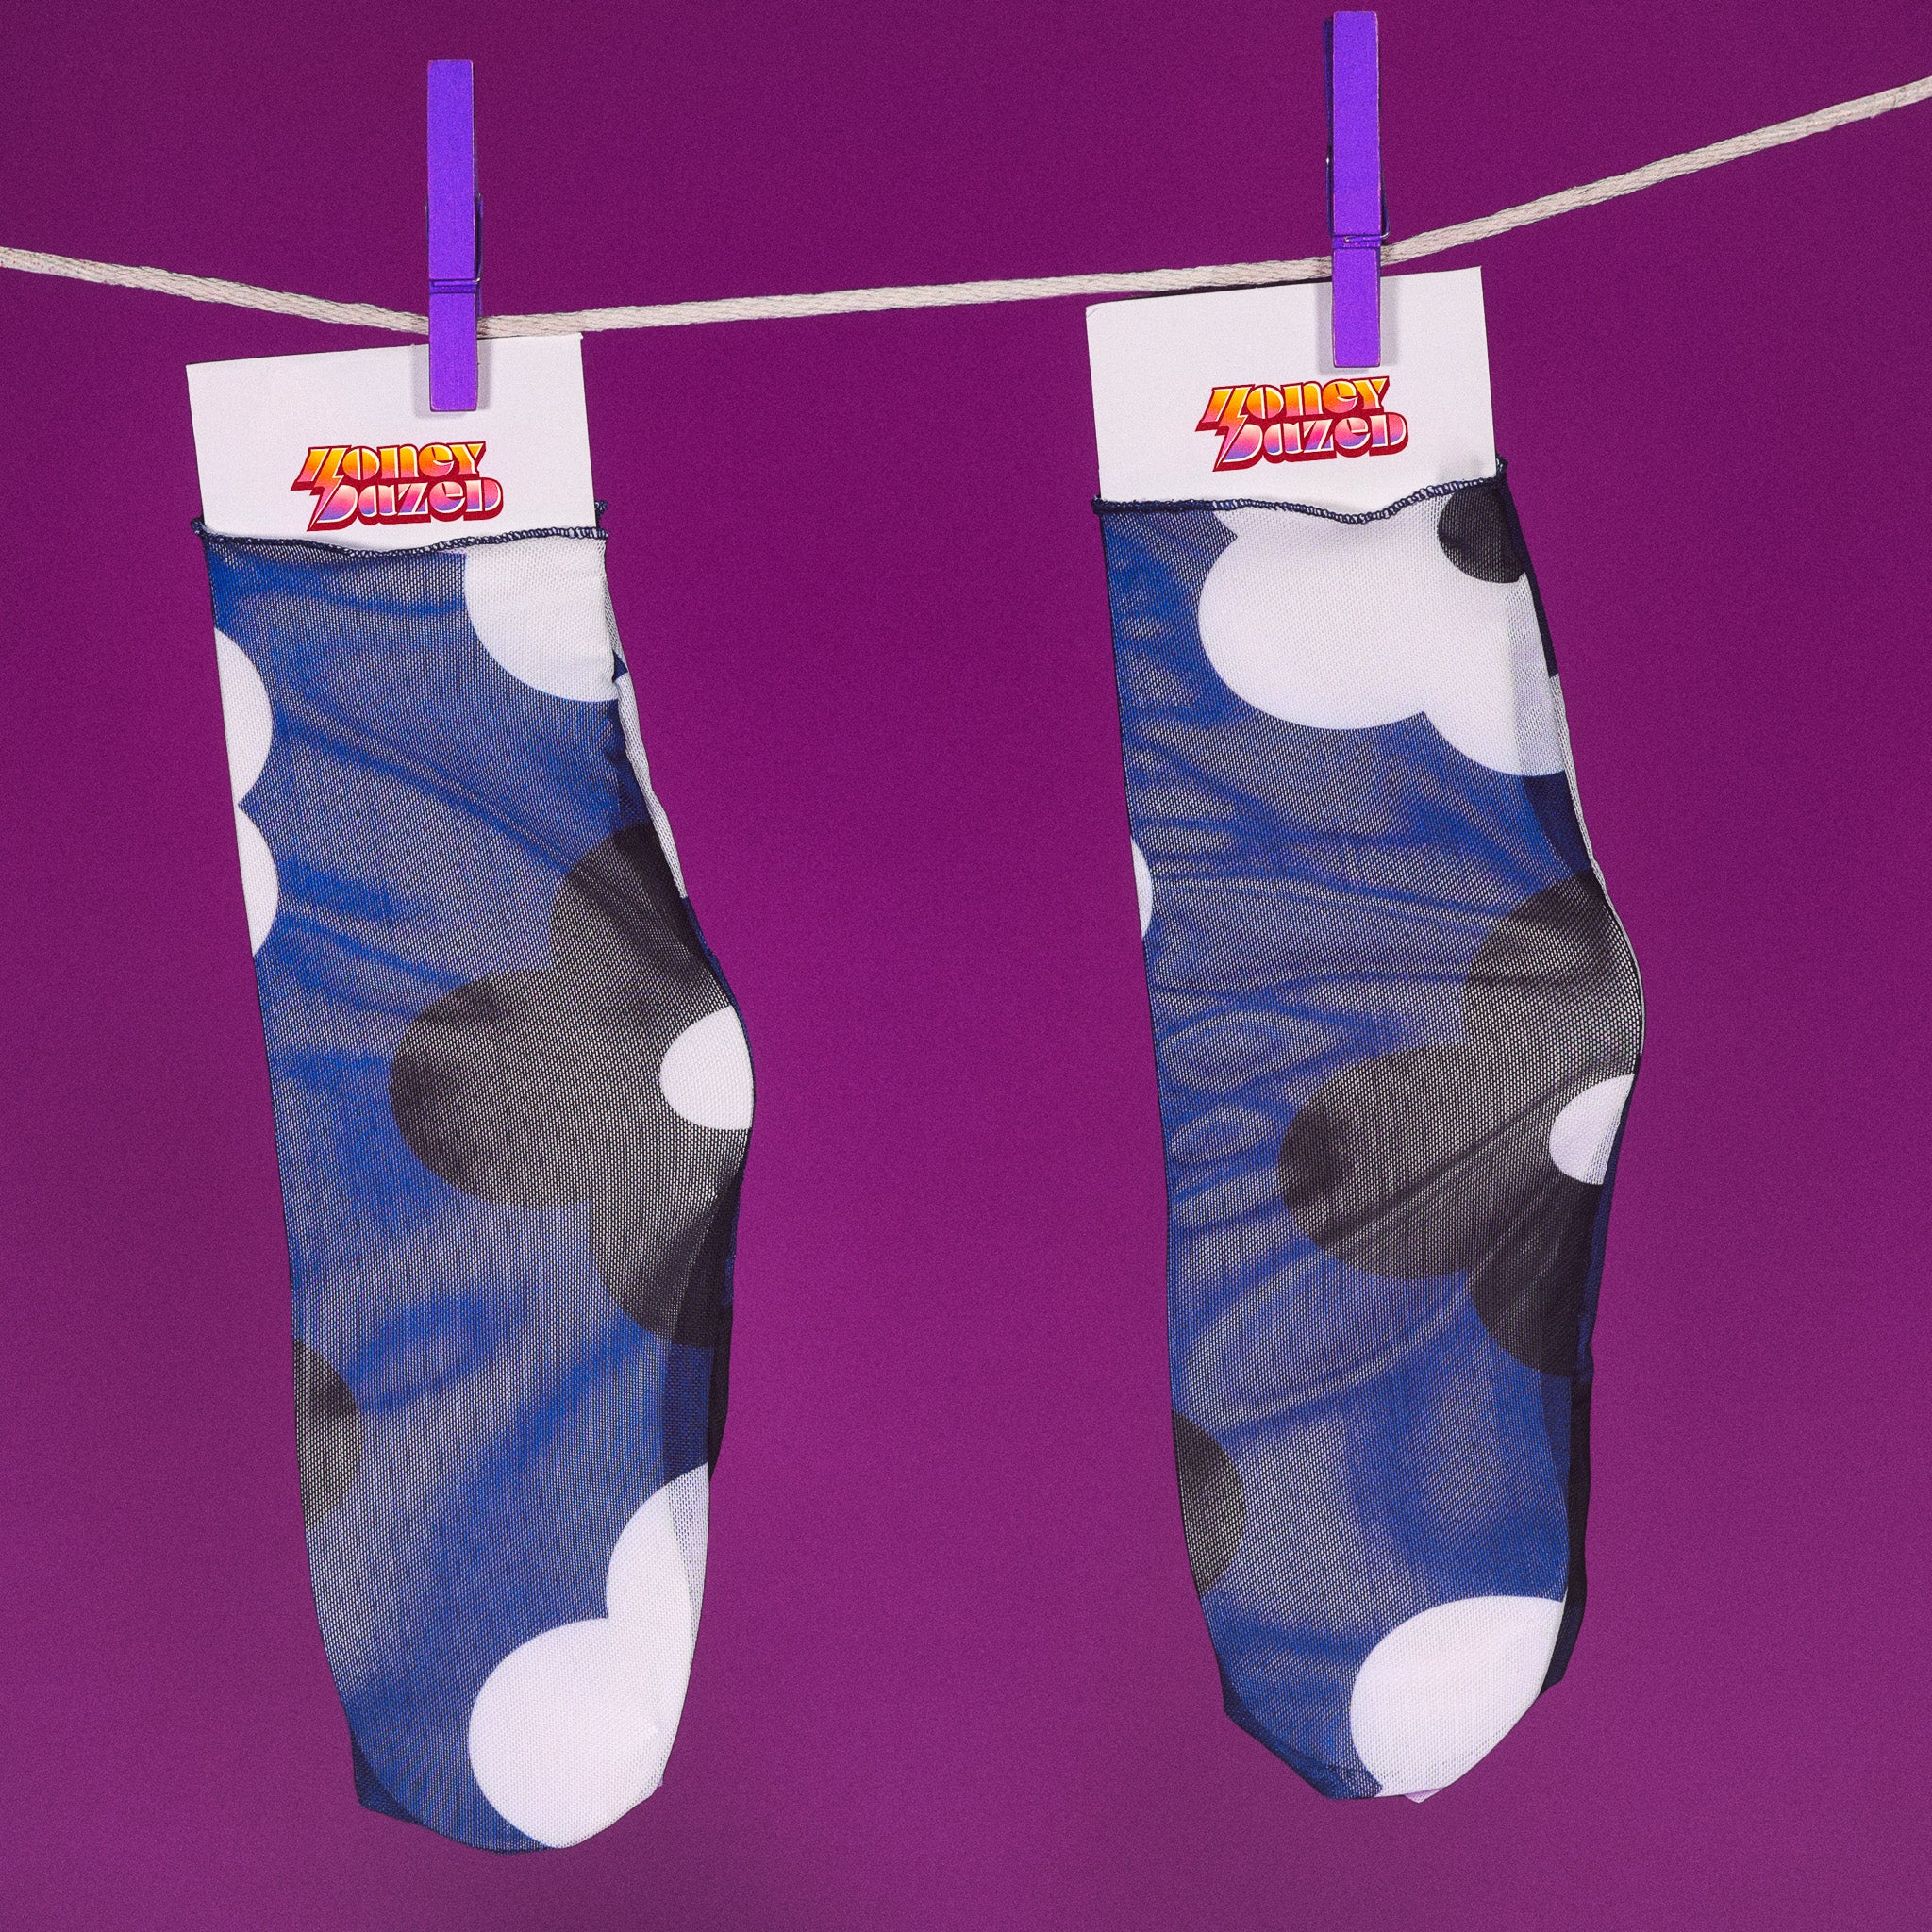 a pair of socks hanging from a clothes line